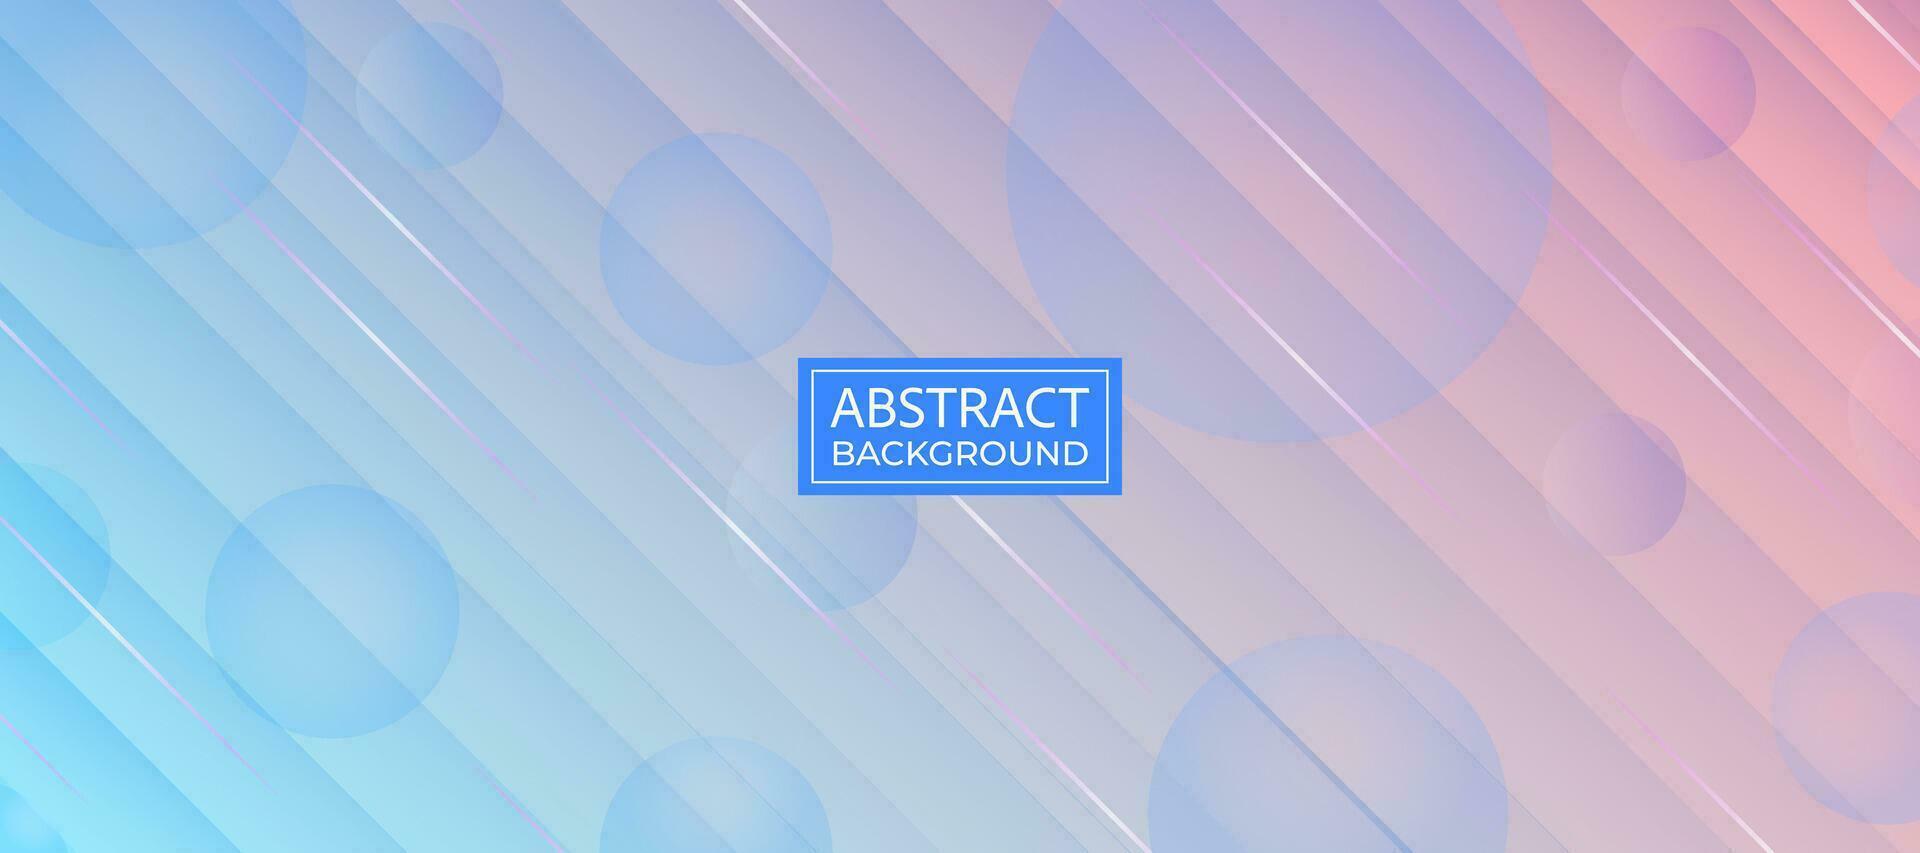 2modern background with abstract gradient colors vector